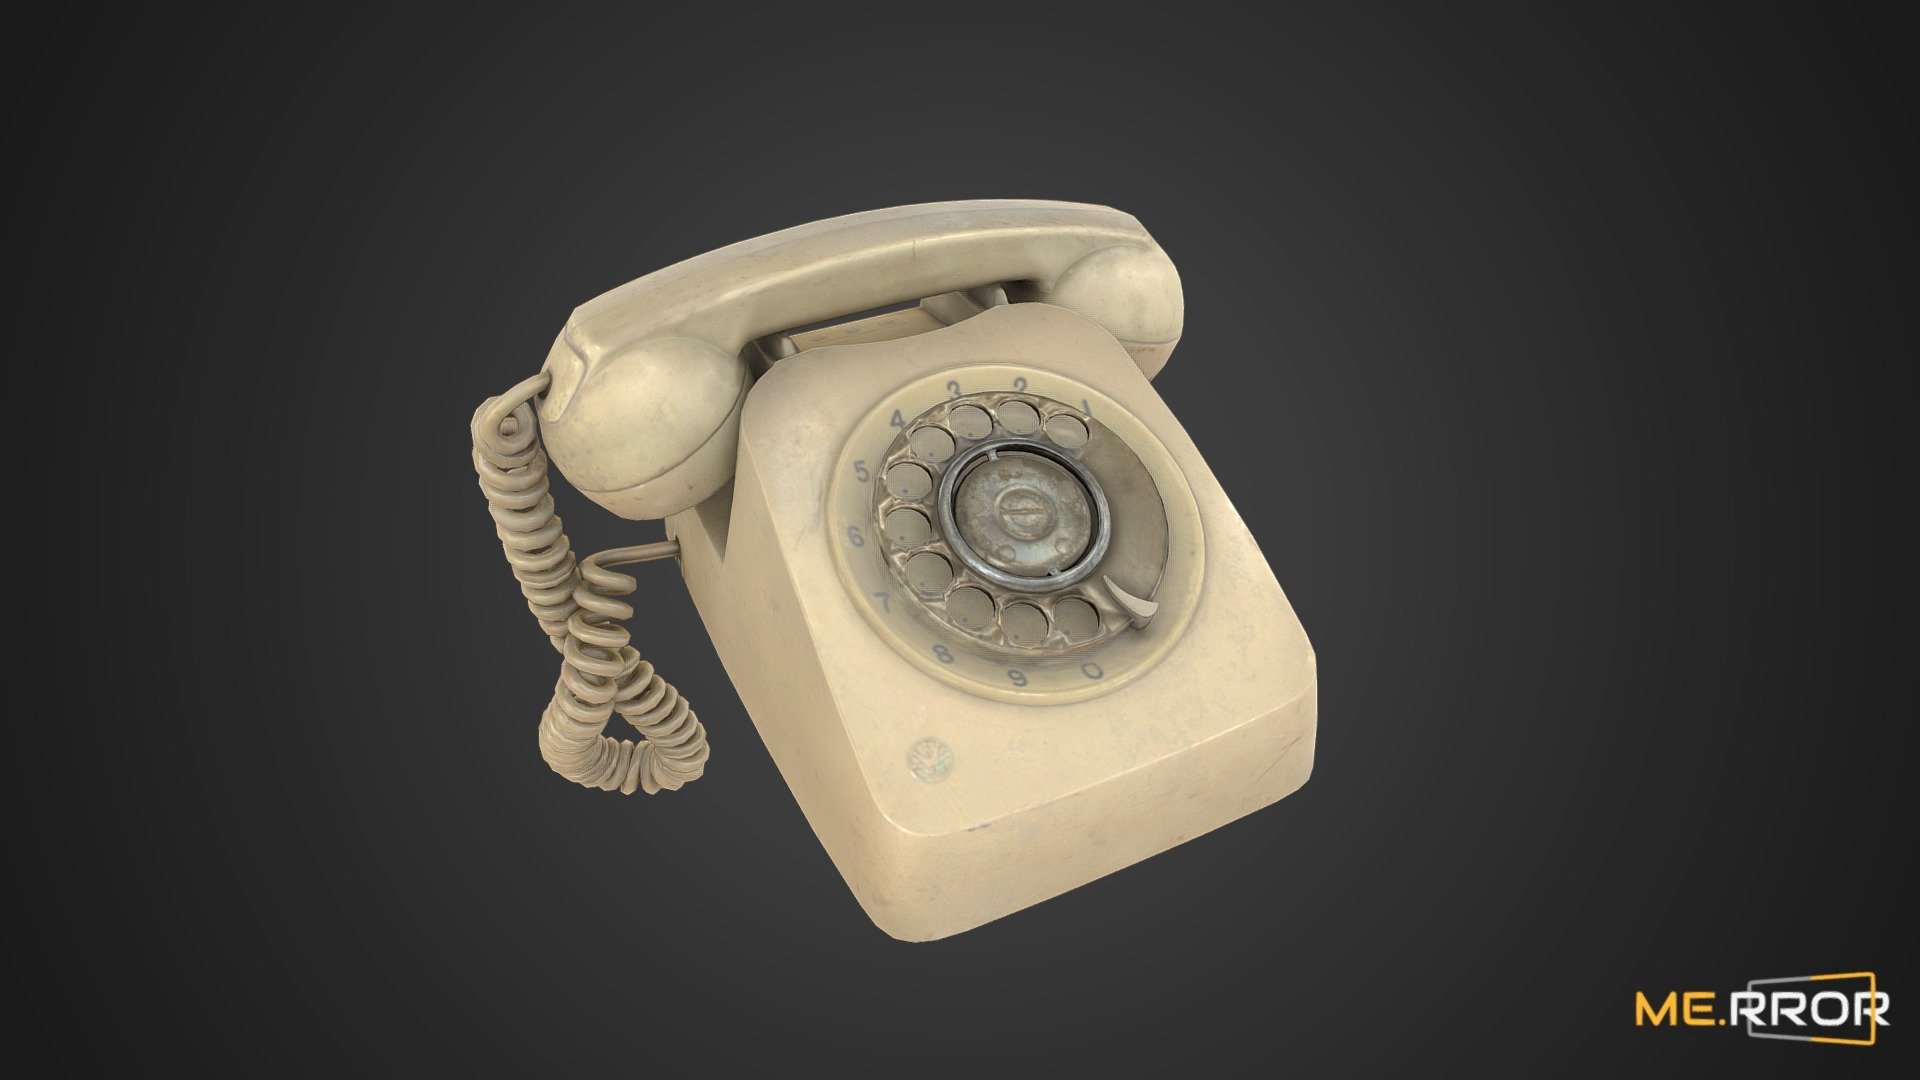 MERROR is a 3D Content PLATFORM which introduces various Asian assets to the 3D world

#3DScanning #Photogrametry #ME.RROR - [Game-Ready] Dial Phone - Buy Royalty Free 3D model by ME.RROR (@merror) 3d model